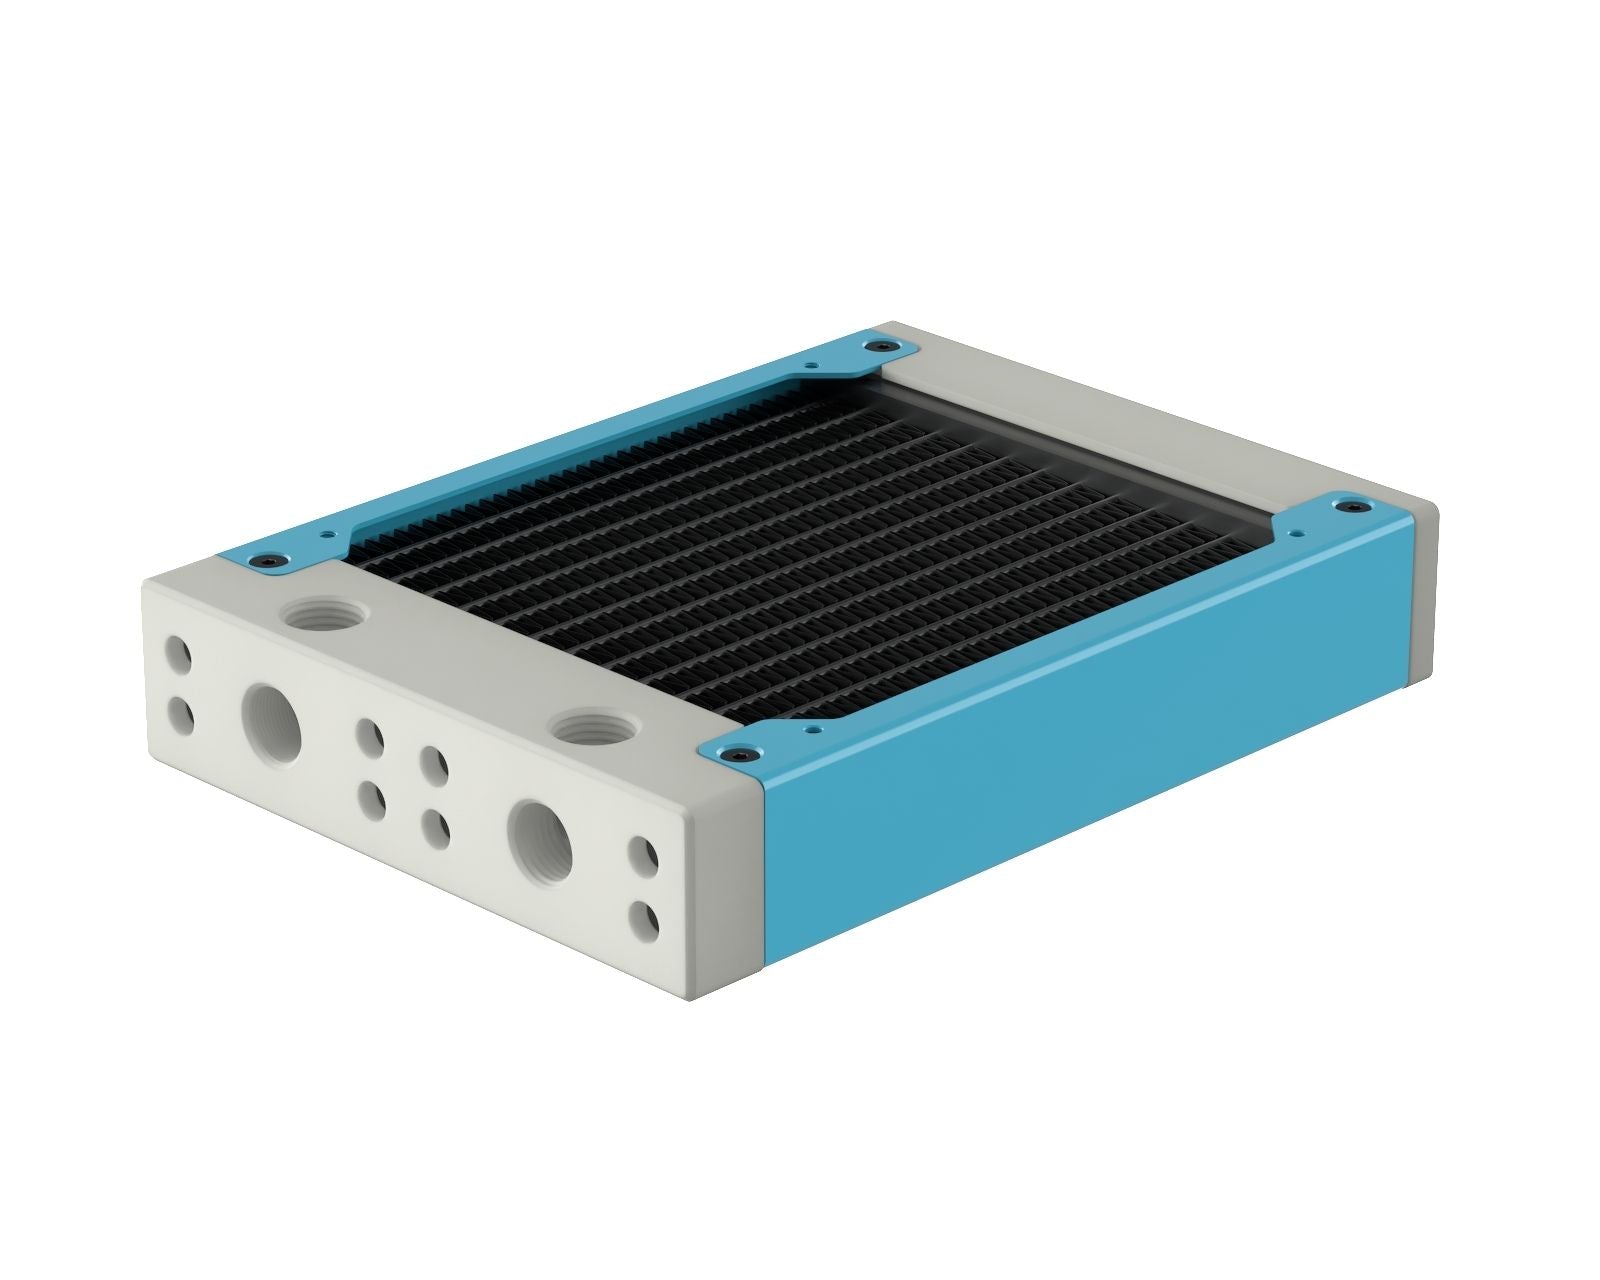 PrimoChill 120SL (30mm) EXIMO Modular Radiator, White POM, 1x120mm, Single Fan (R-SL-W12) Available in 20+ Colors, Assembled in USA and Custom Watercooling Loop Ready - Sky Blue